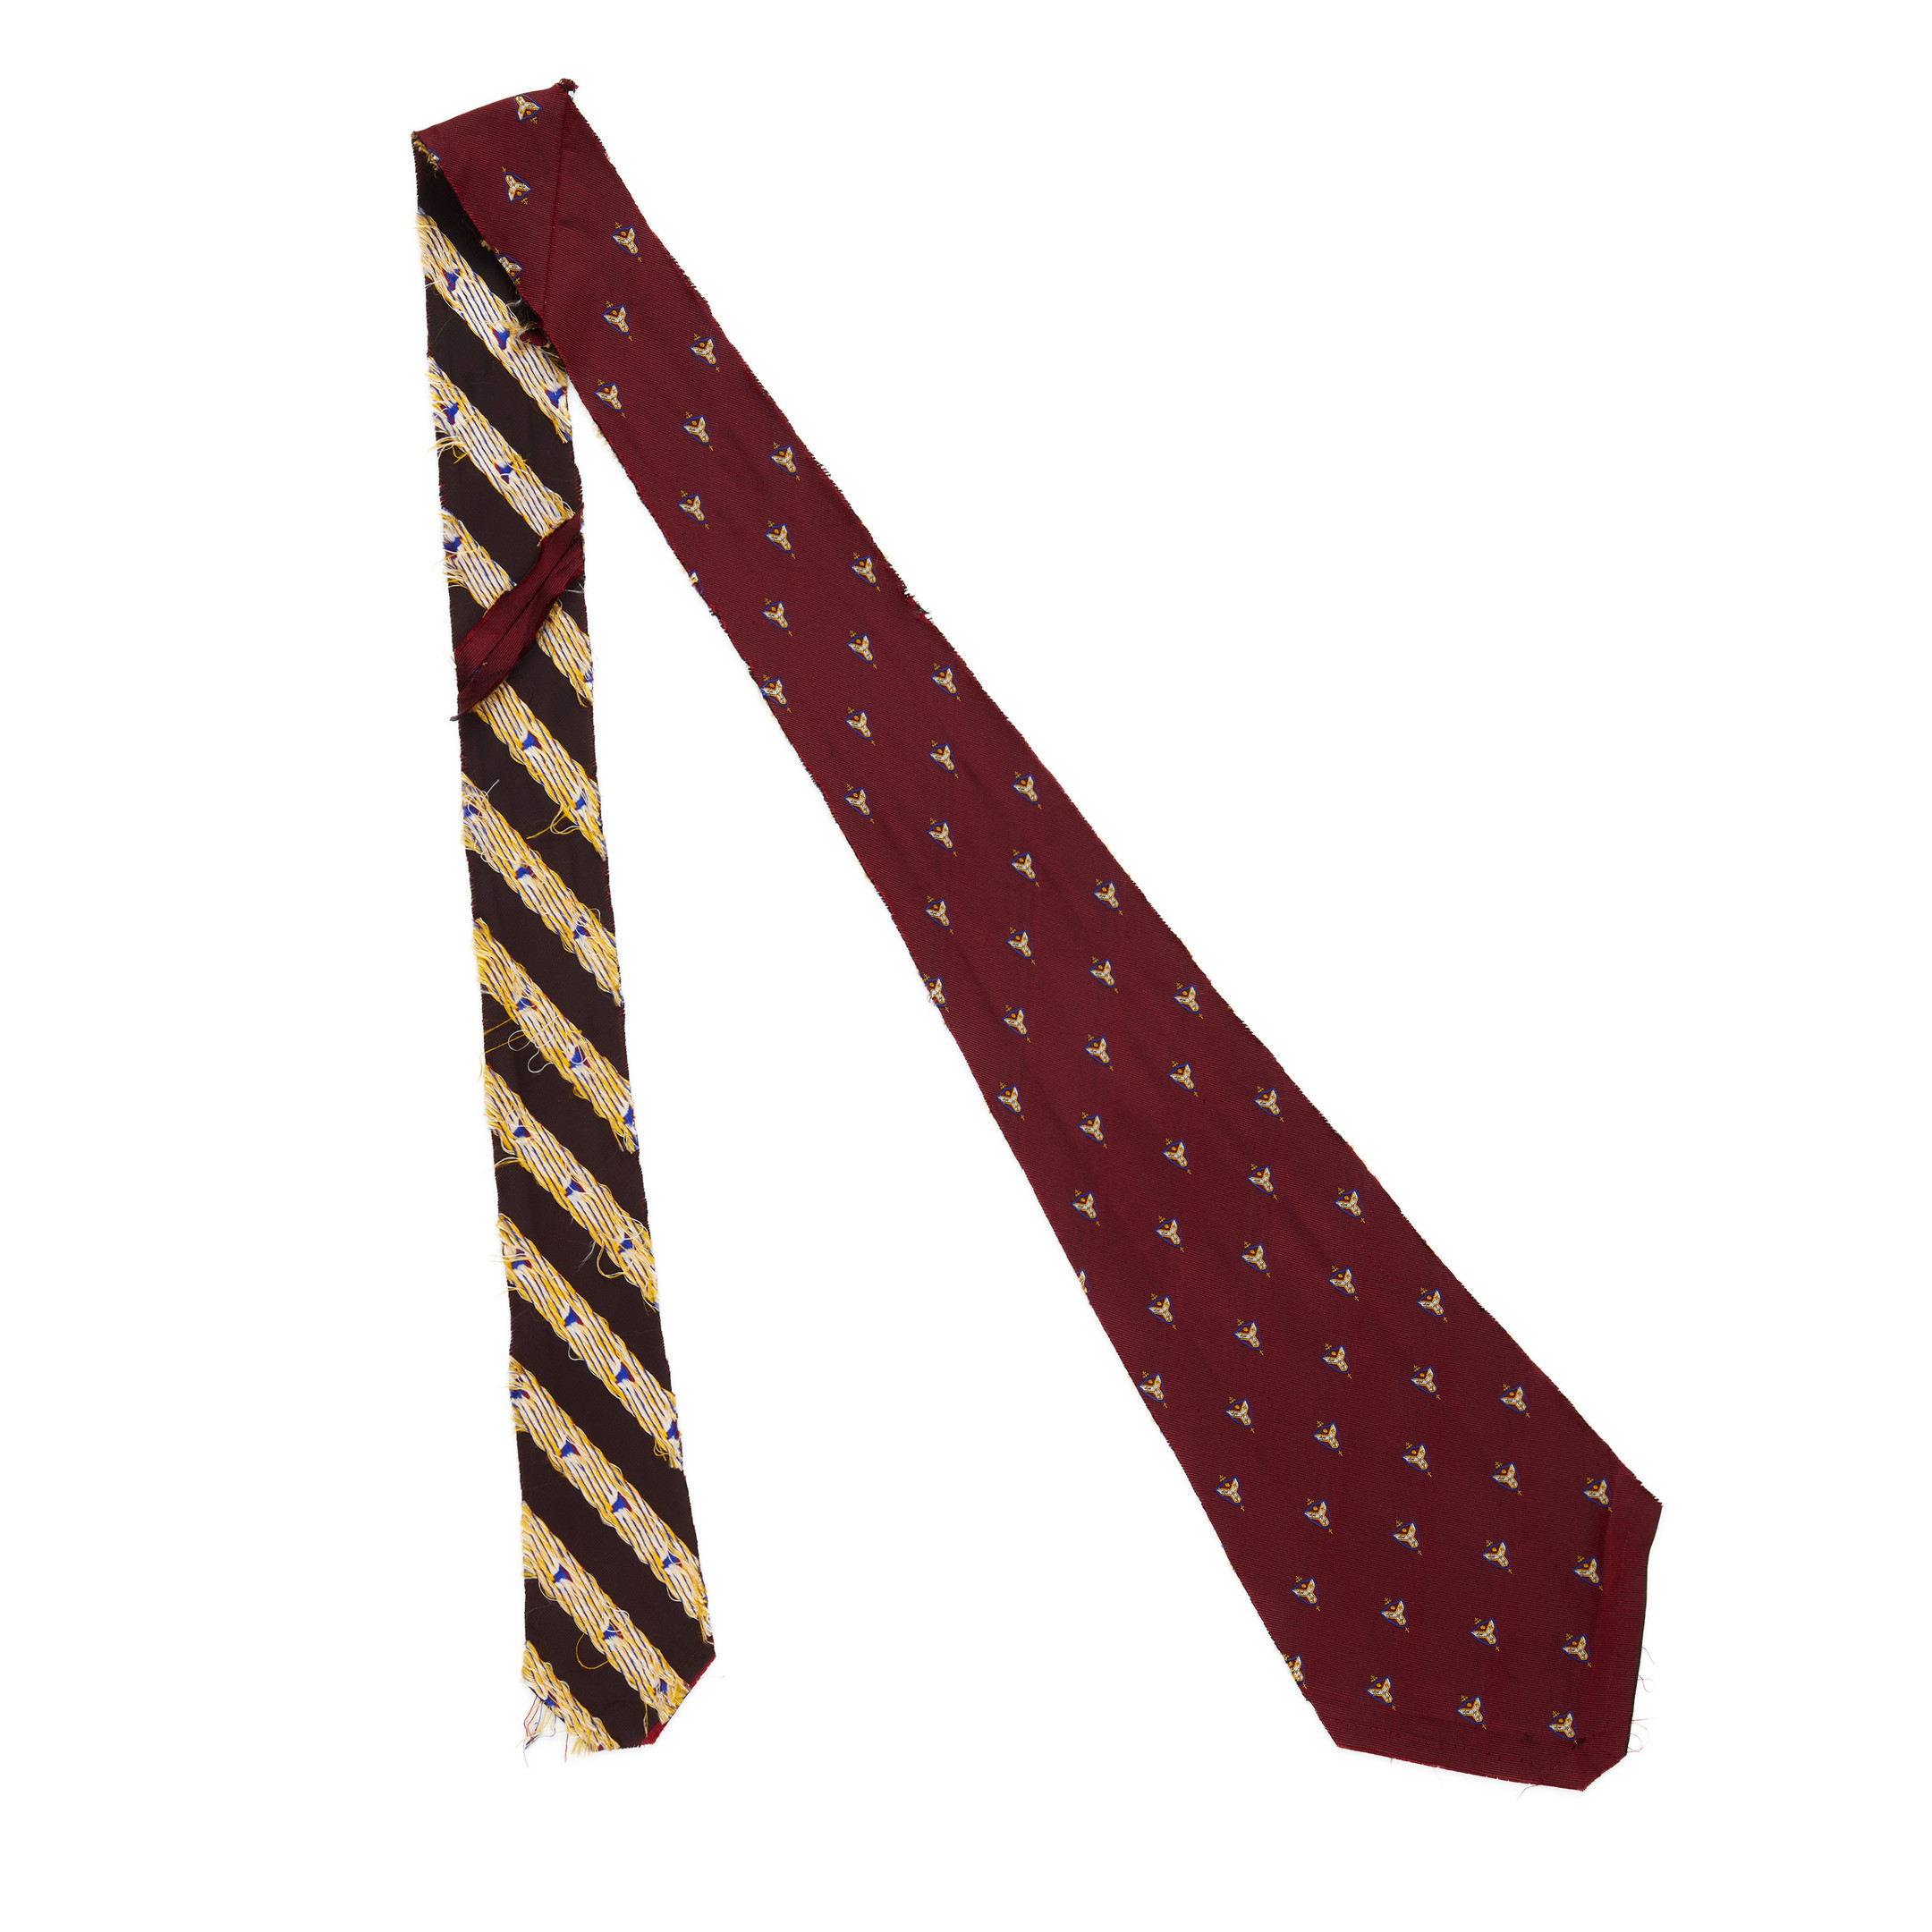 Unconstructed Club Tie